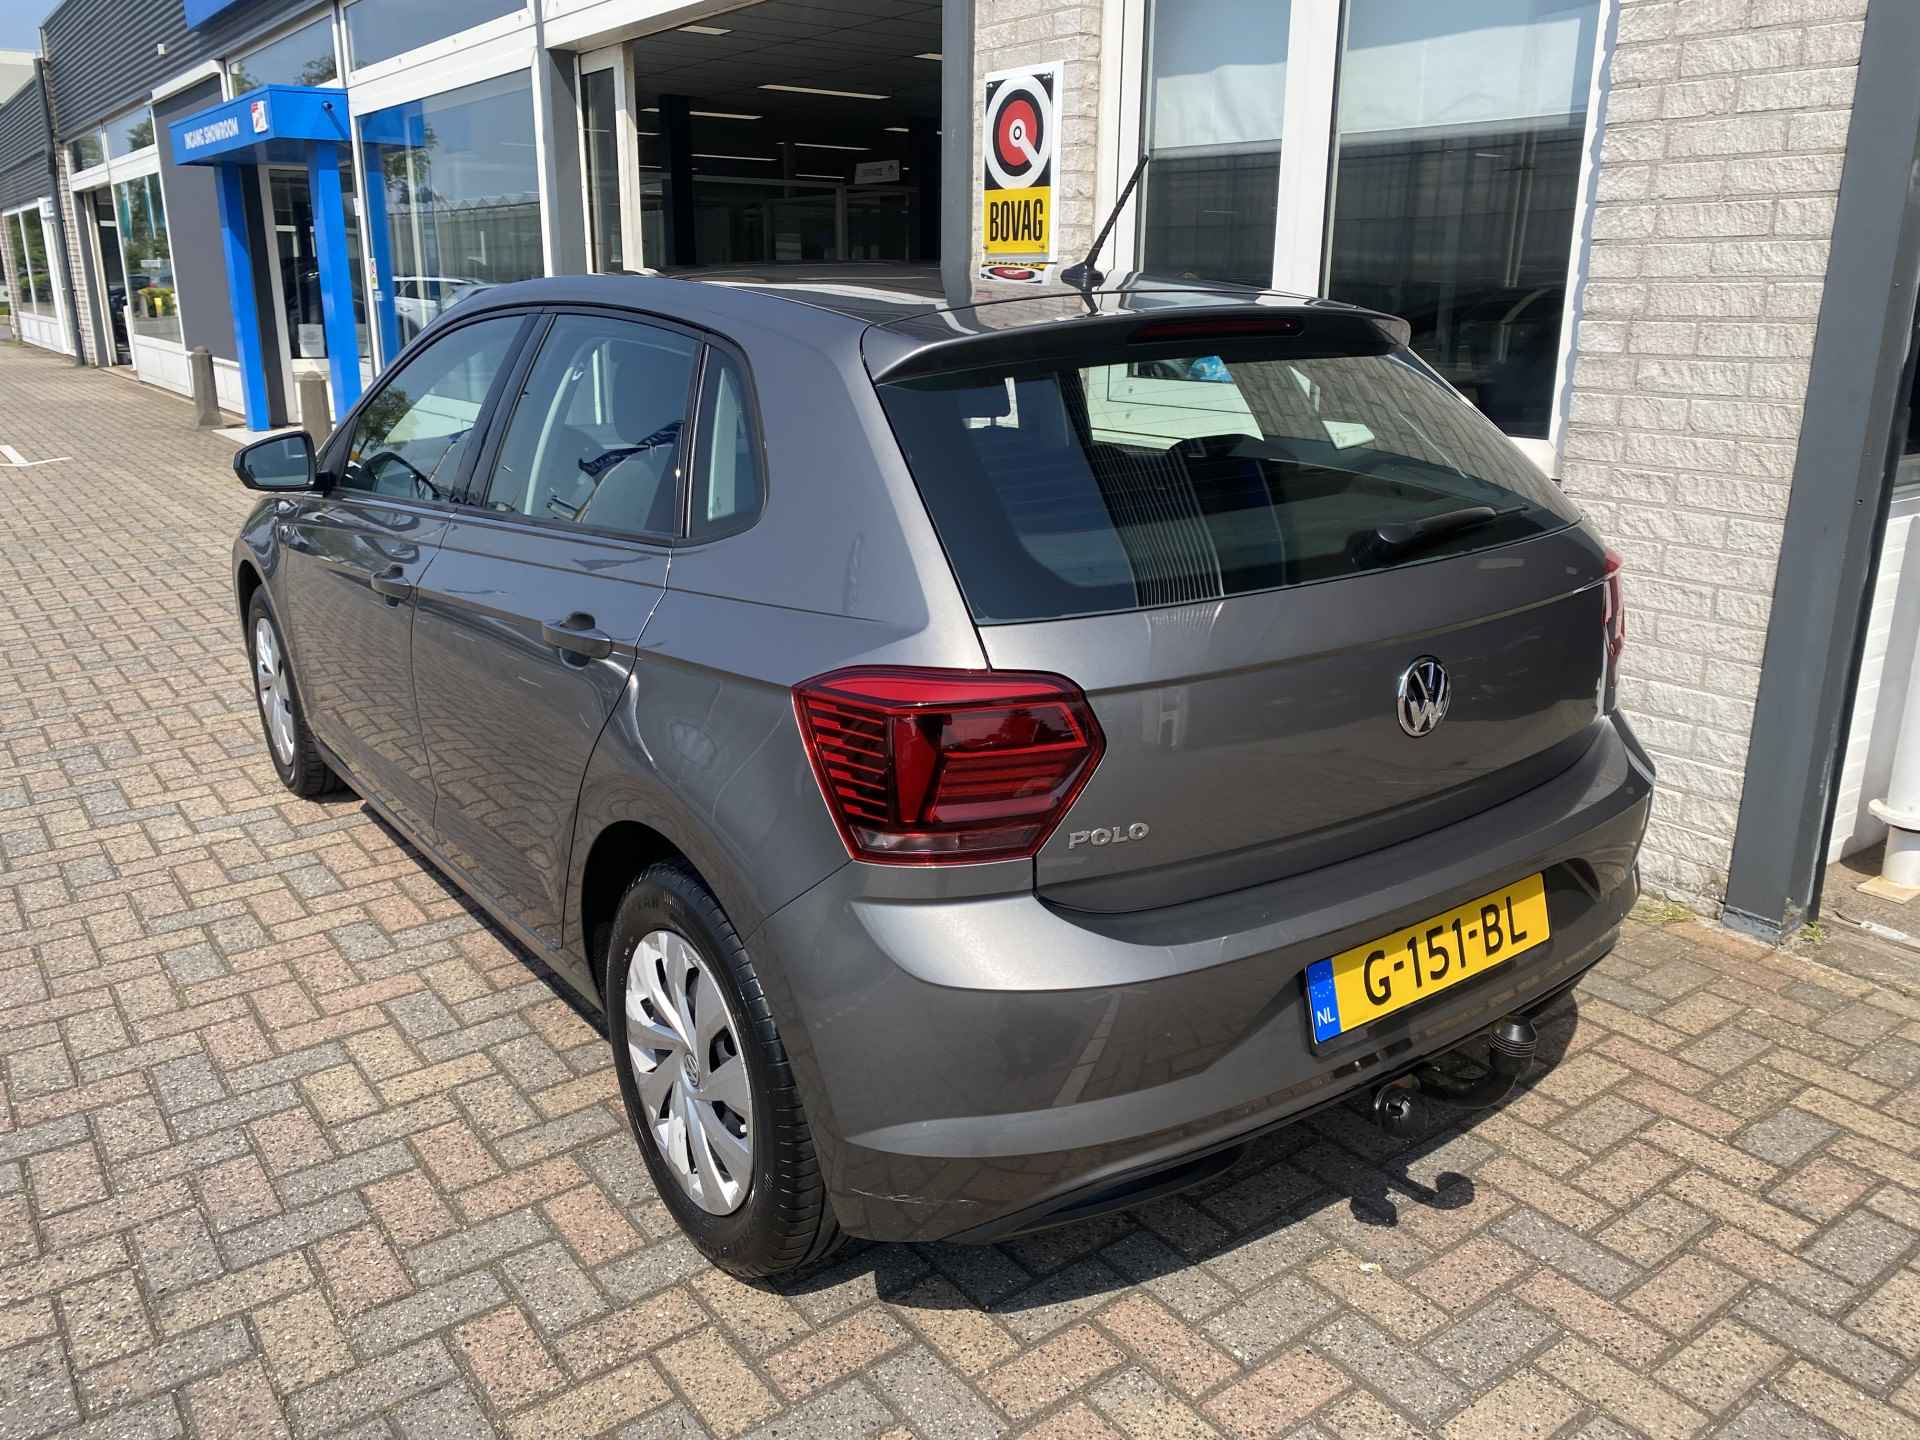 Volkswagen Polo 1.0 MPI Comfortline / APP-CONNECT/ AIRCO/ TREKHAAK/ BLUETOOTH/ CRUISE - 7/33